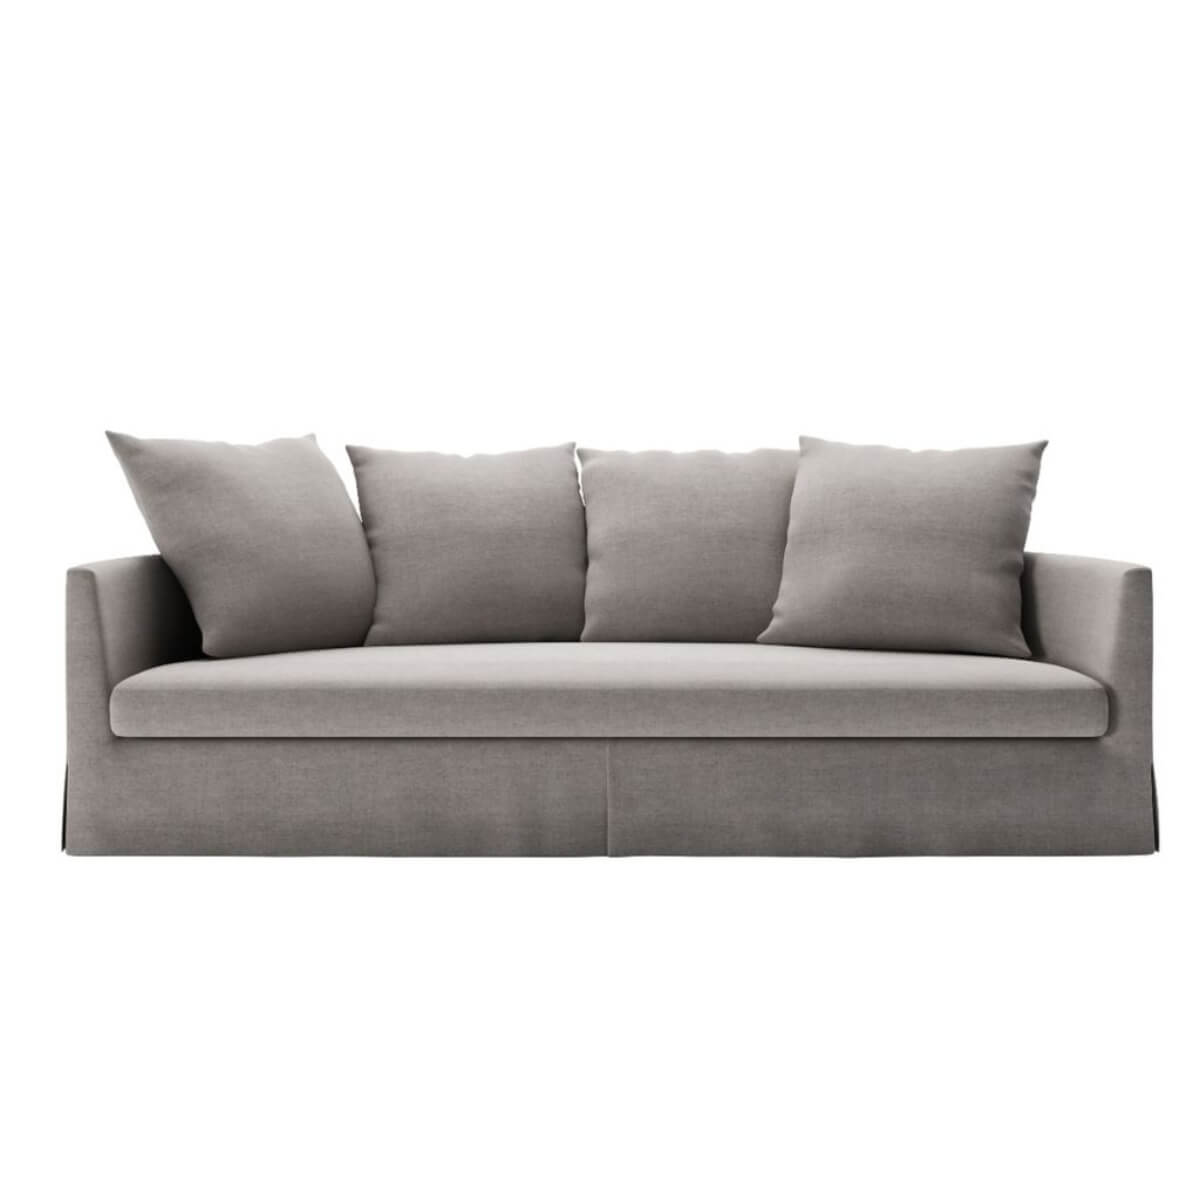 Astral Affinity Cotton Linen Sofa - A Celestial Embrace